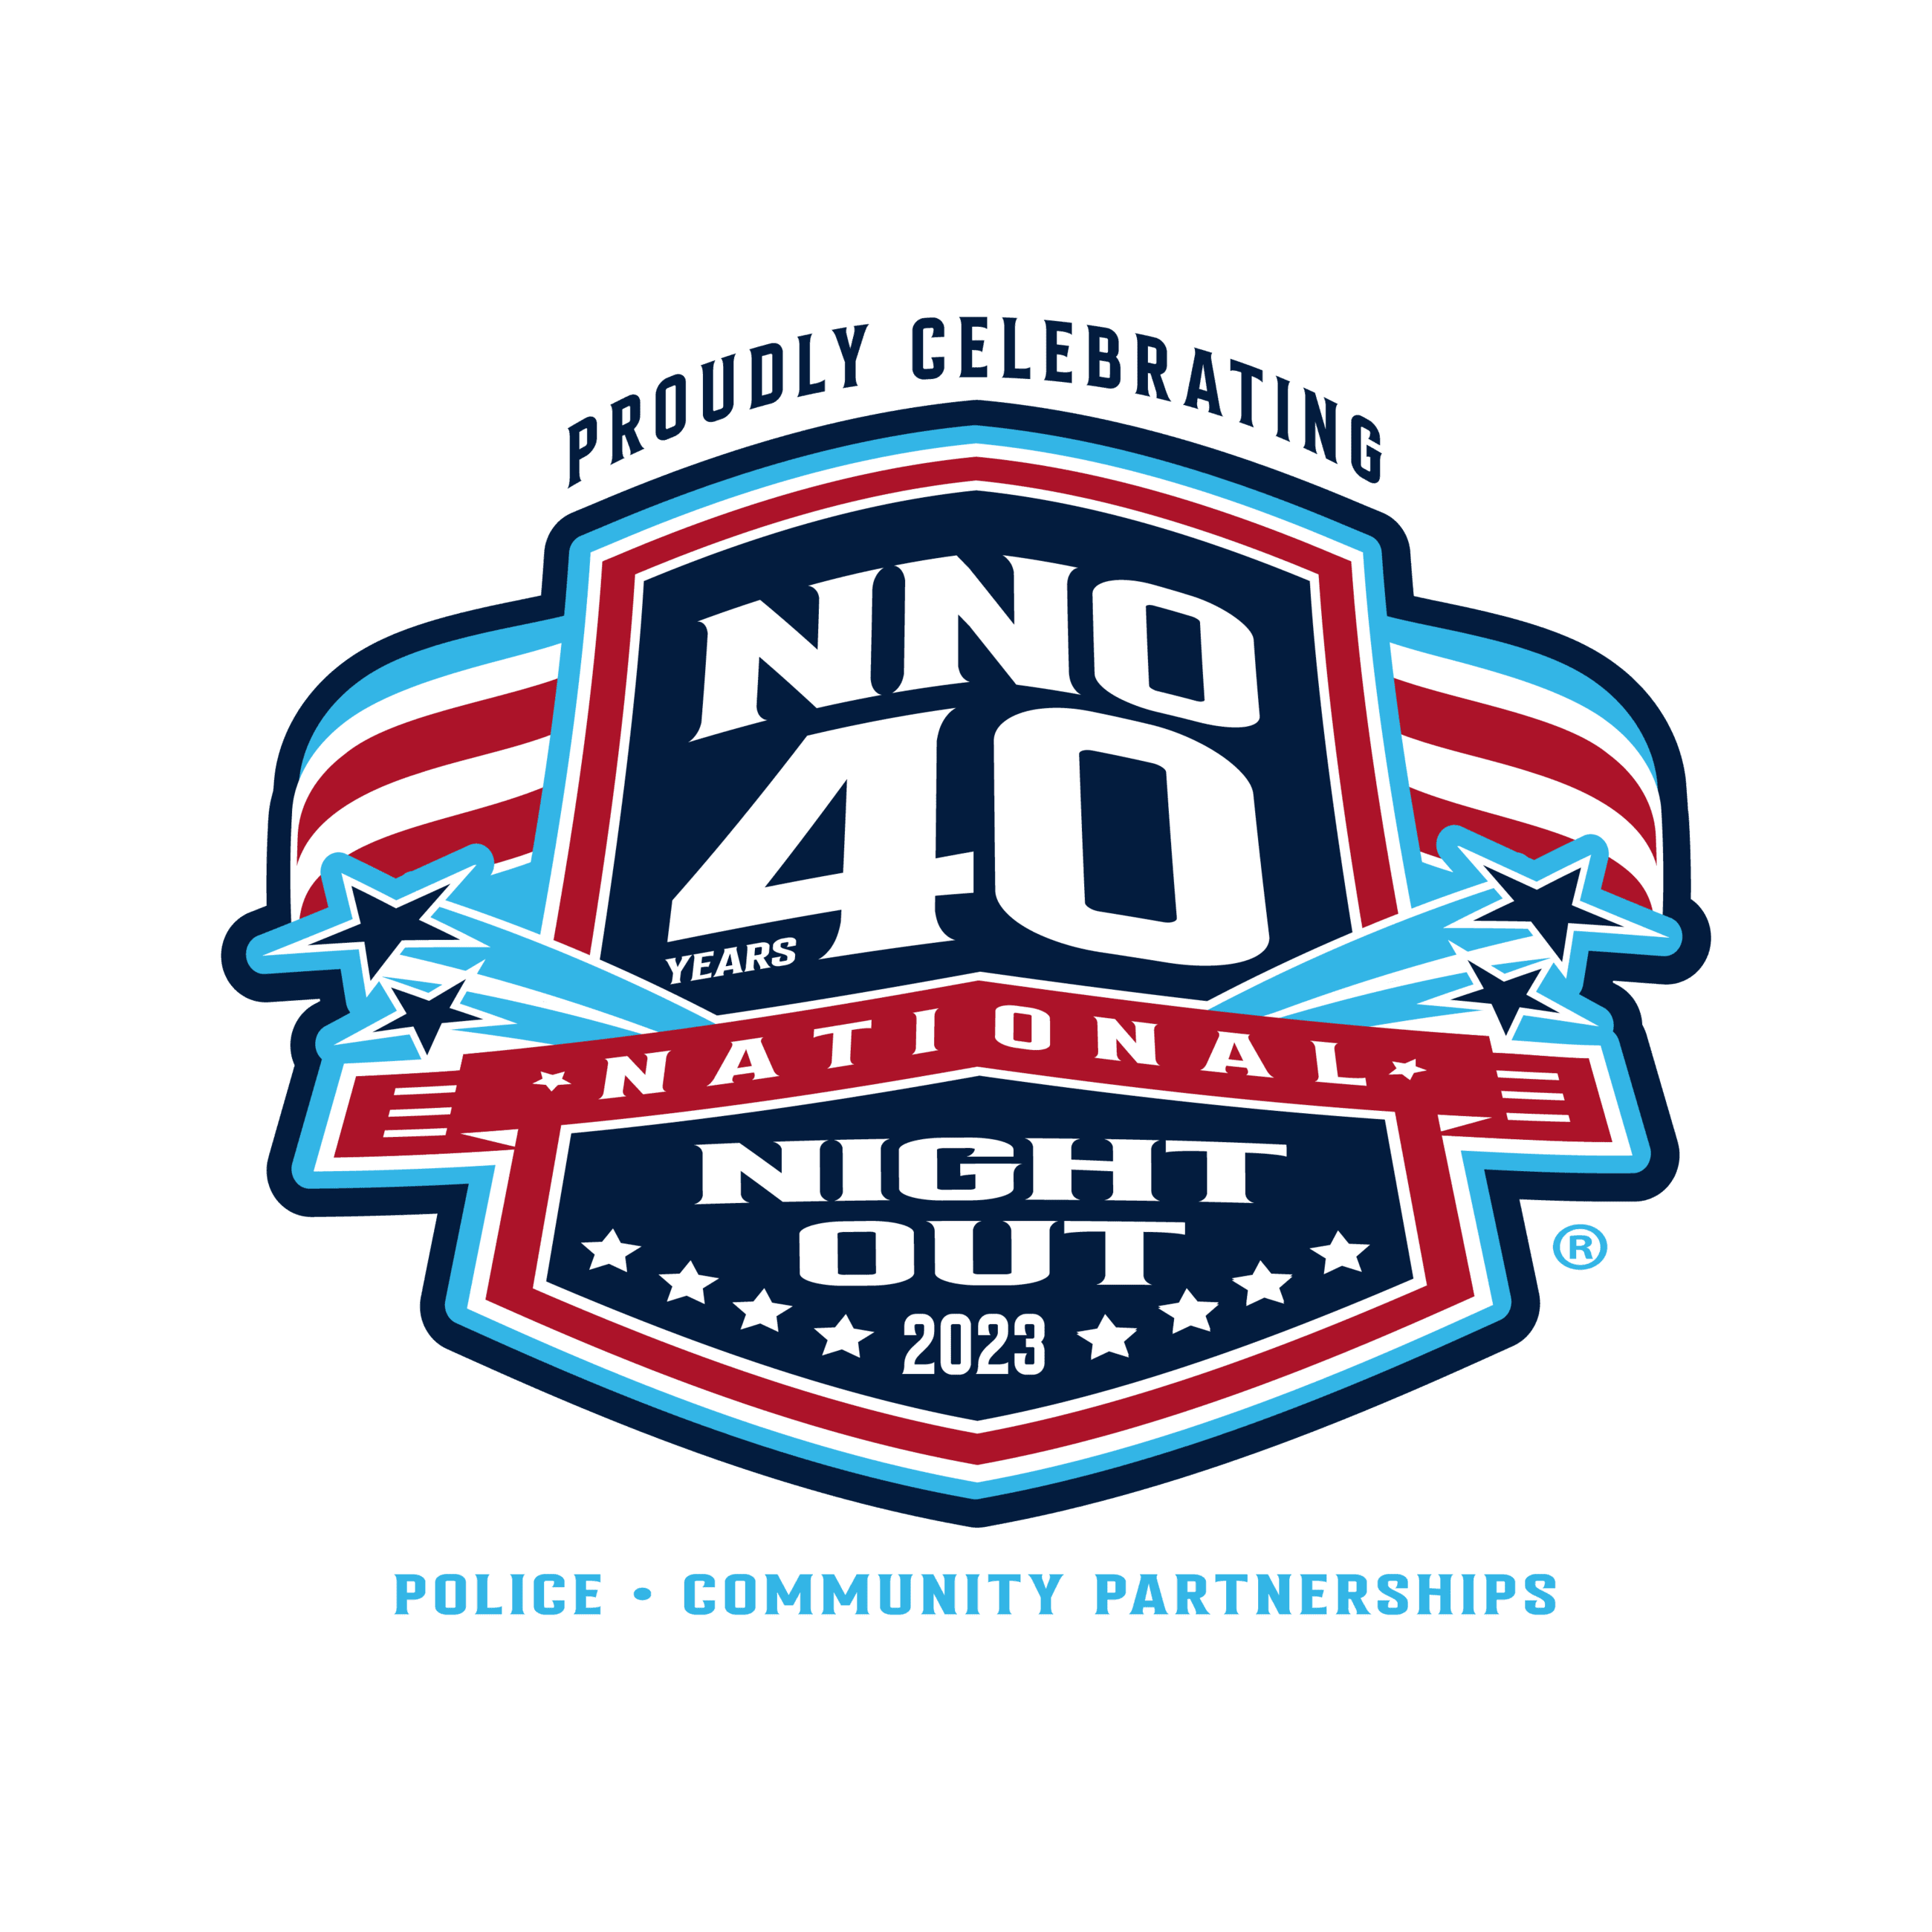 National Night Out Event - Tuesday, August 1, 2023